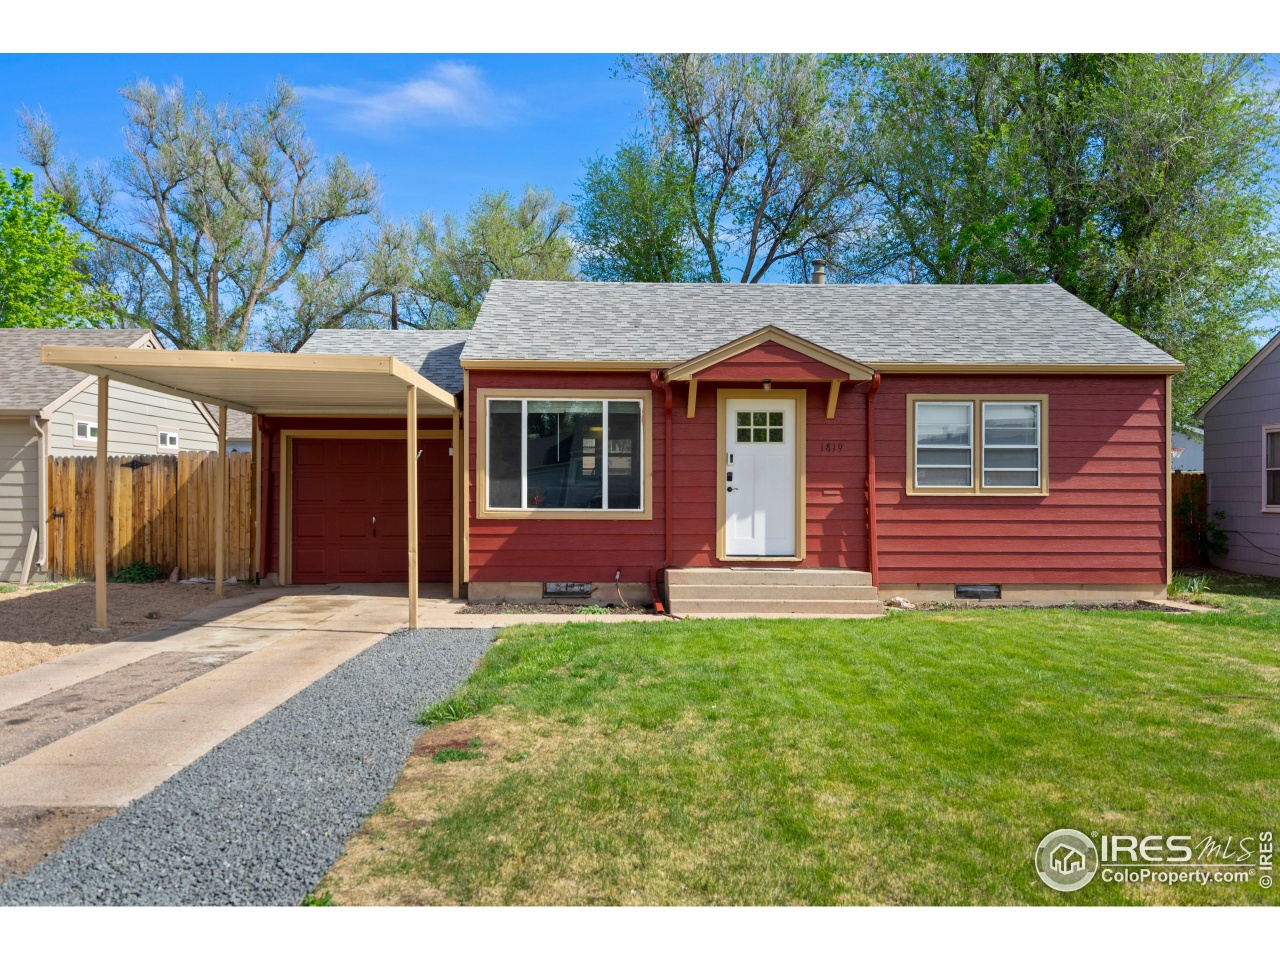 1819 7th St, Greeley, CO 80631 | MLS# 970741 | Redfin